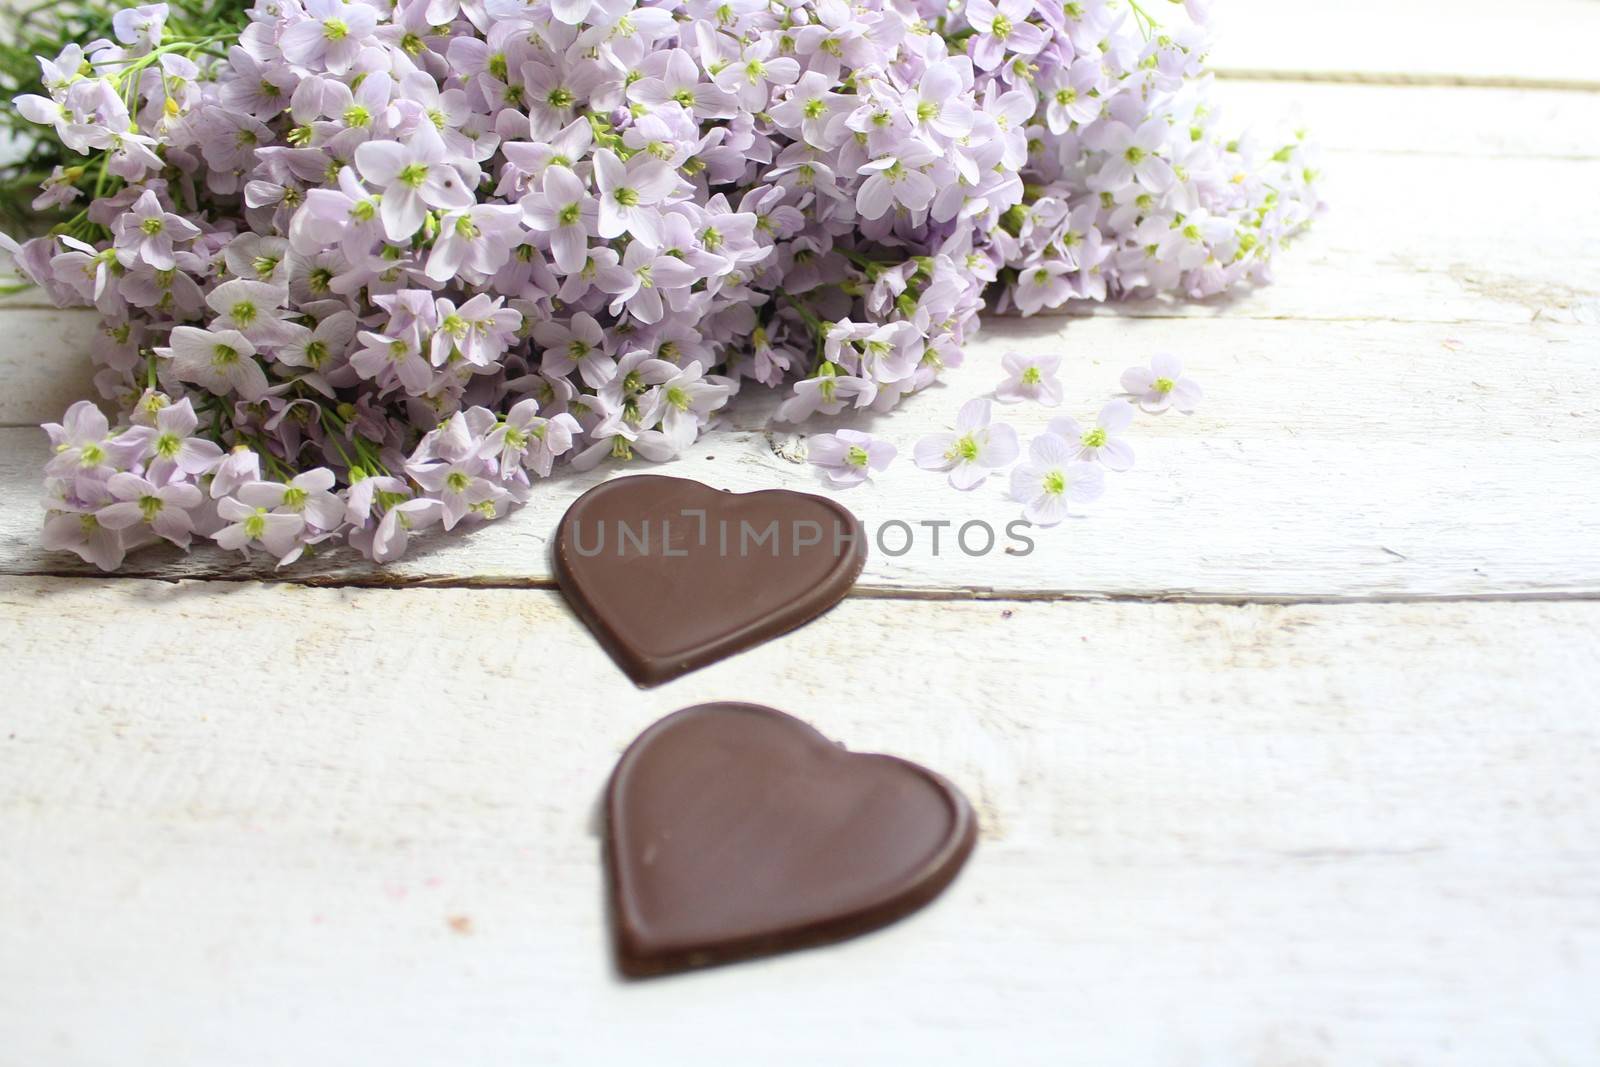 cuckoo flowers with chocolate hearts by martina_unbehauen